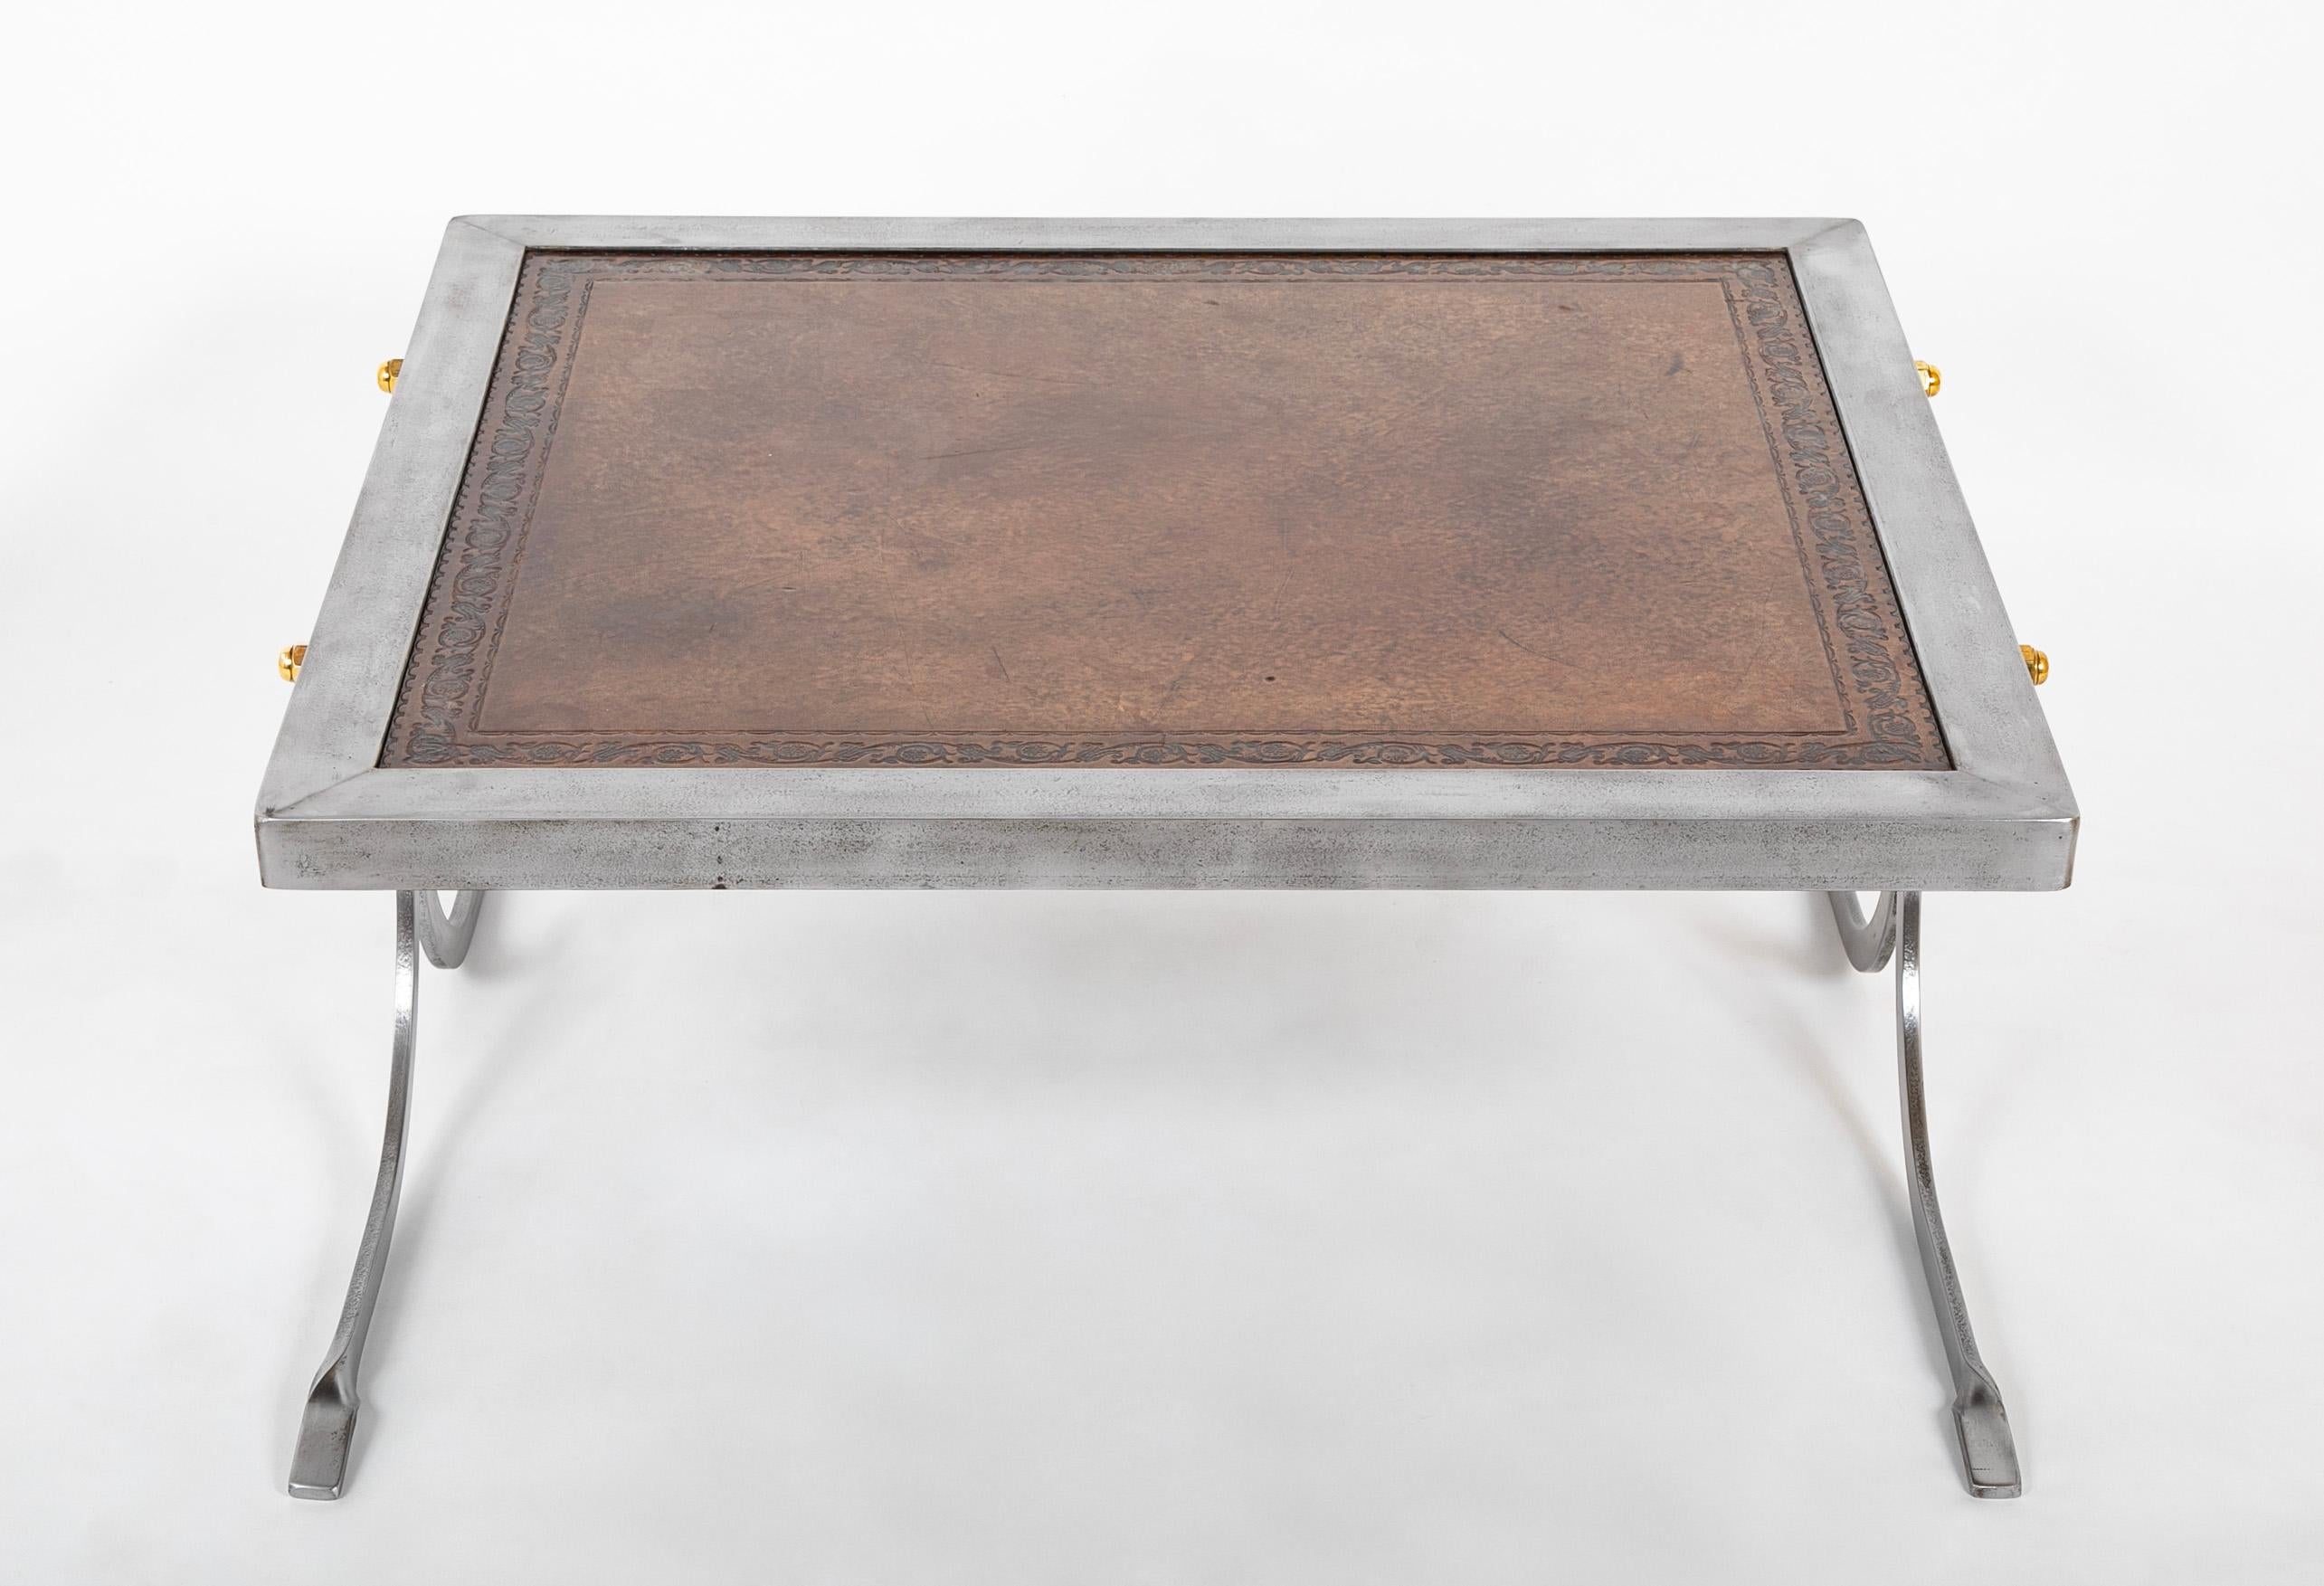 This table is a successful marriage of modern and traditional, a streamlined polished steel base held together with brass nuts, with a elegant leather top with tooled decorative border. Showing homage to Jean Michel Frank, the simple profile is a